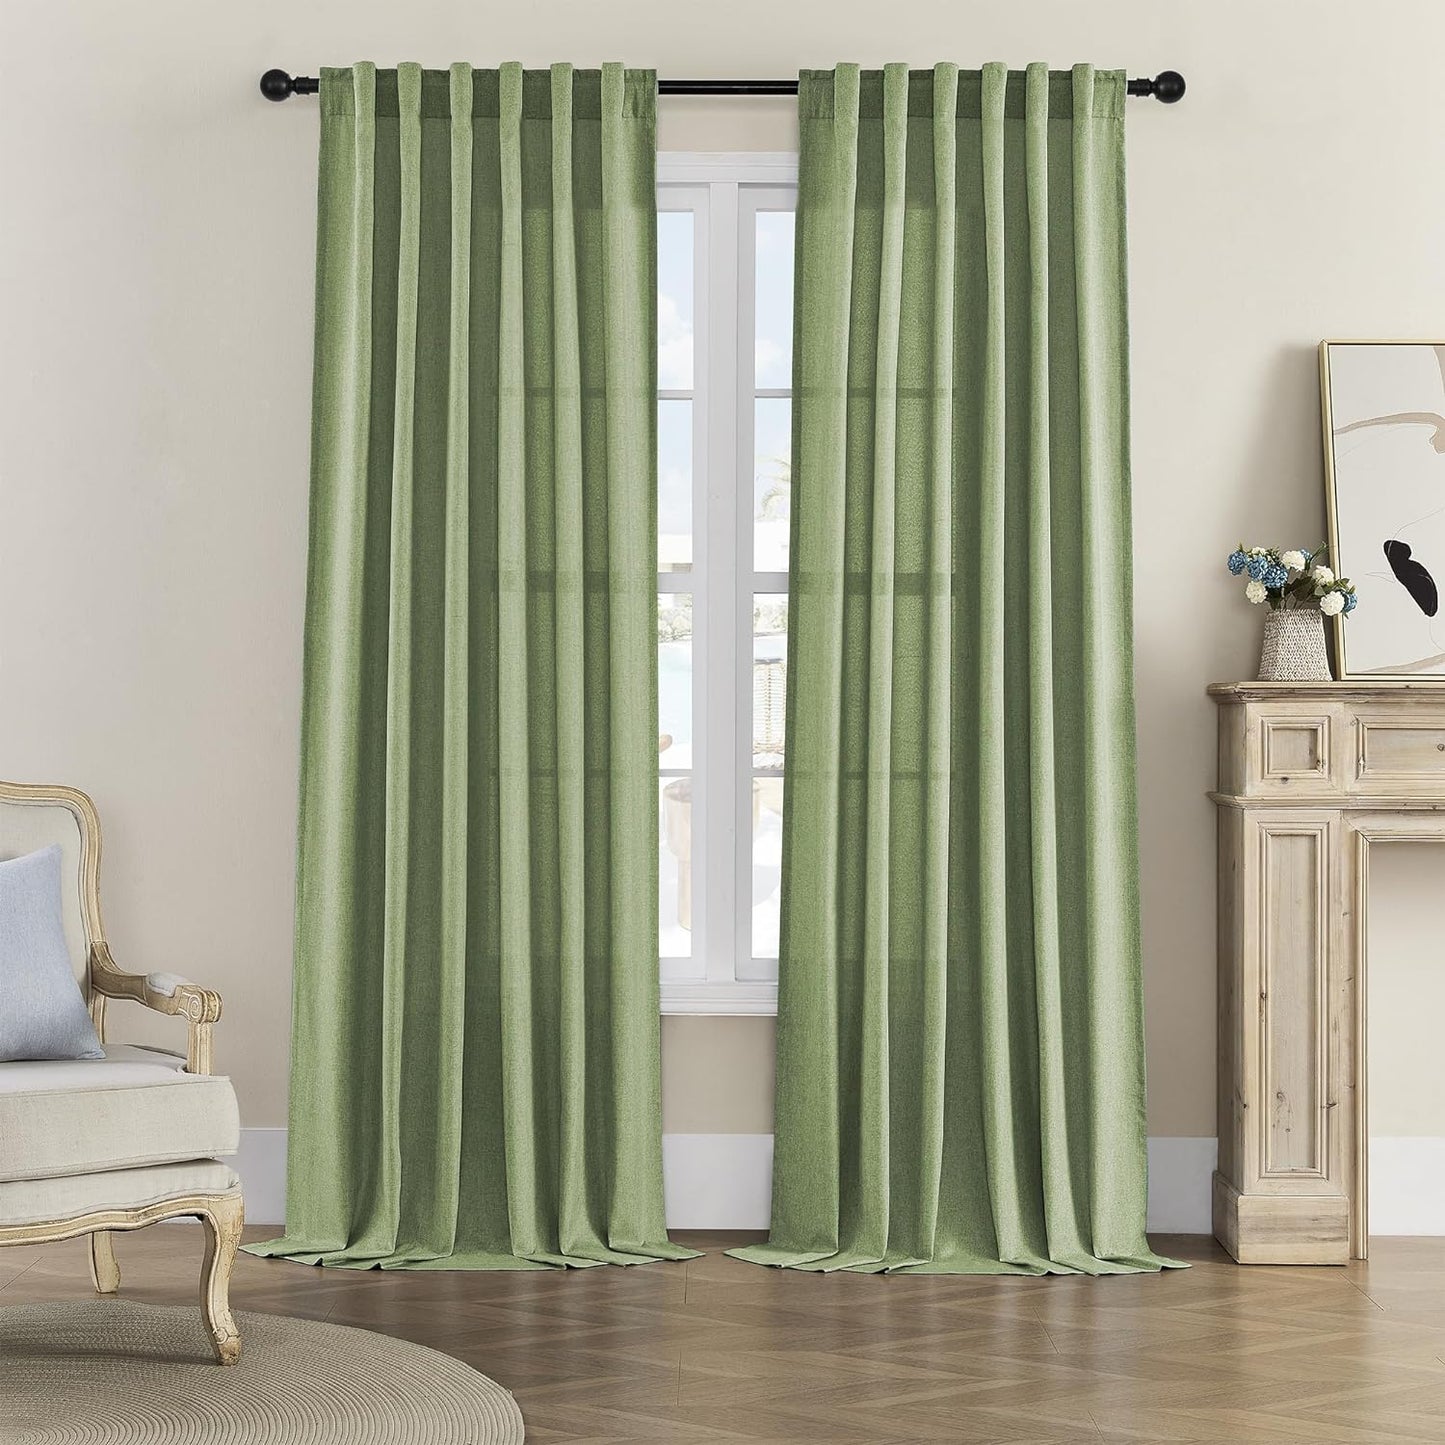 Linen Sheer Window Curtains, Rod Pocket & Back Tab Modern Semi Sheer Panels Privacy with Light Filter Linen Drapes for Sliding Glass Door/Living Room, W60 X L84, 2 Pieces  DONREN Sage 50X120 